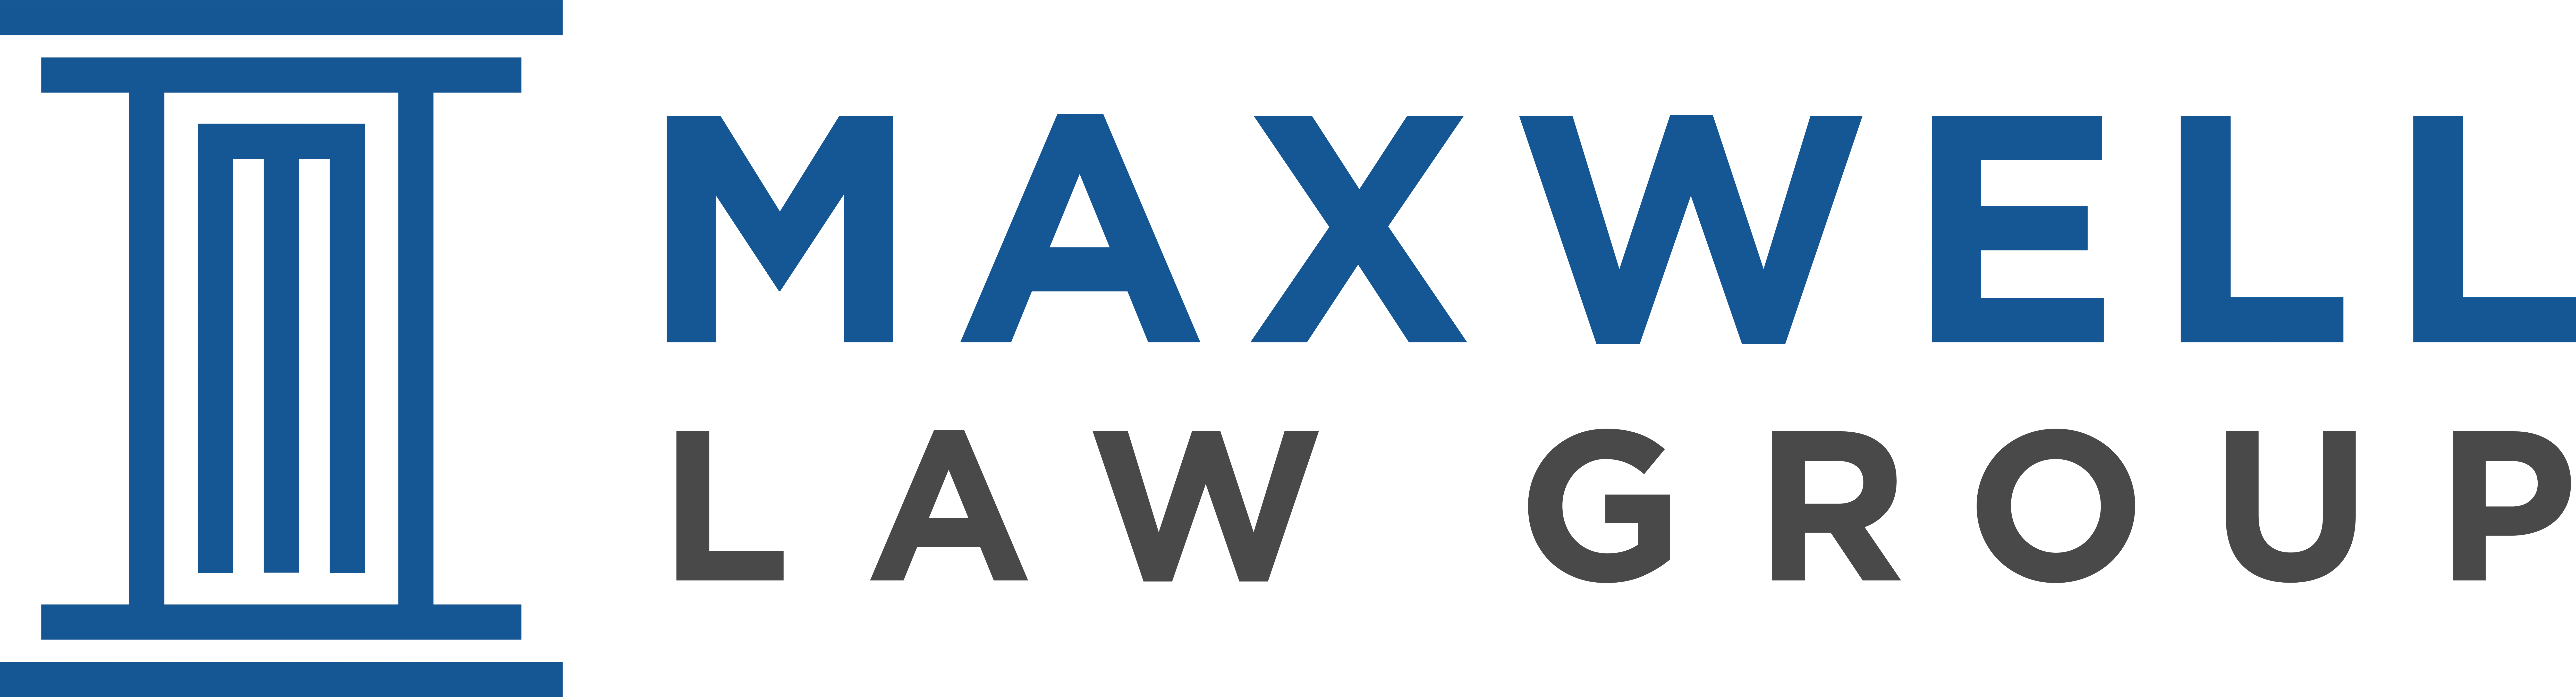 Maxwell Law Group LLP color logo